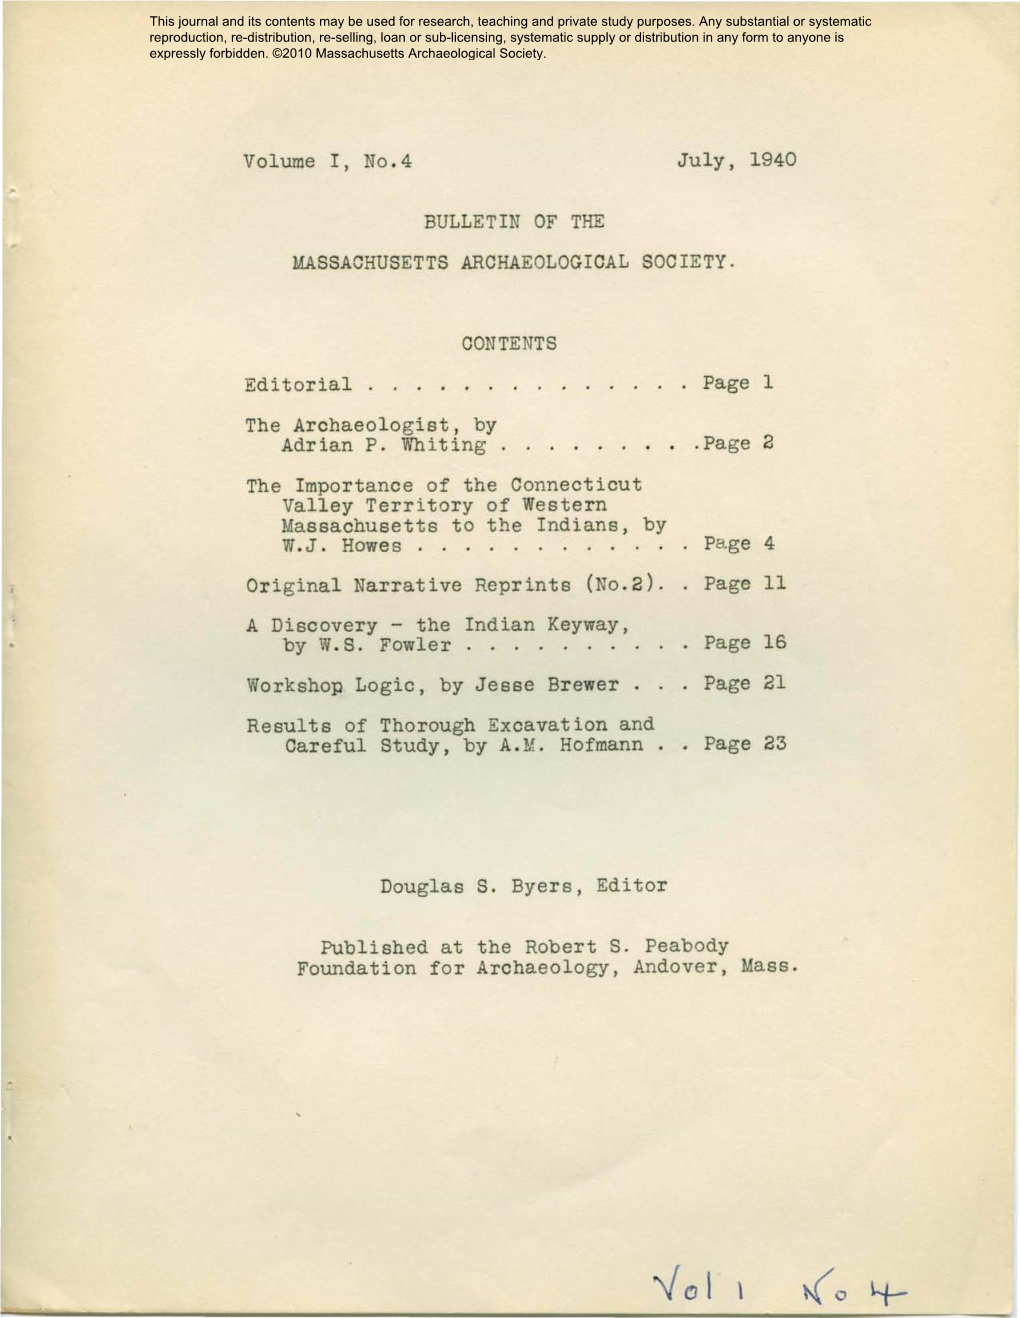 Bulletin of the Massachusetts Archaeological Society, Vol. 1, No